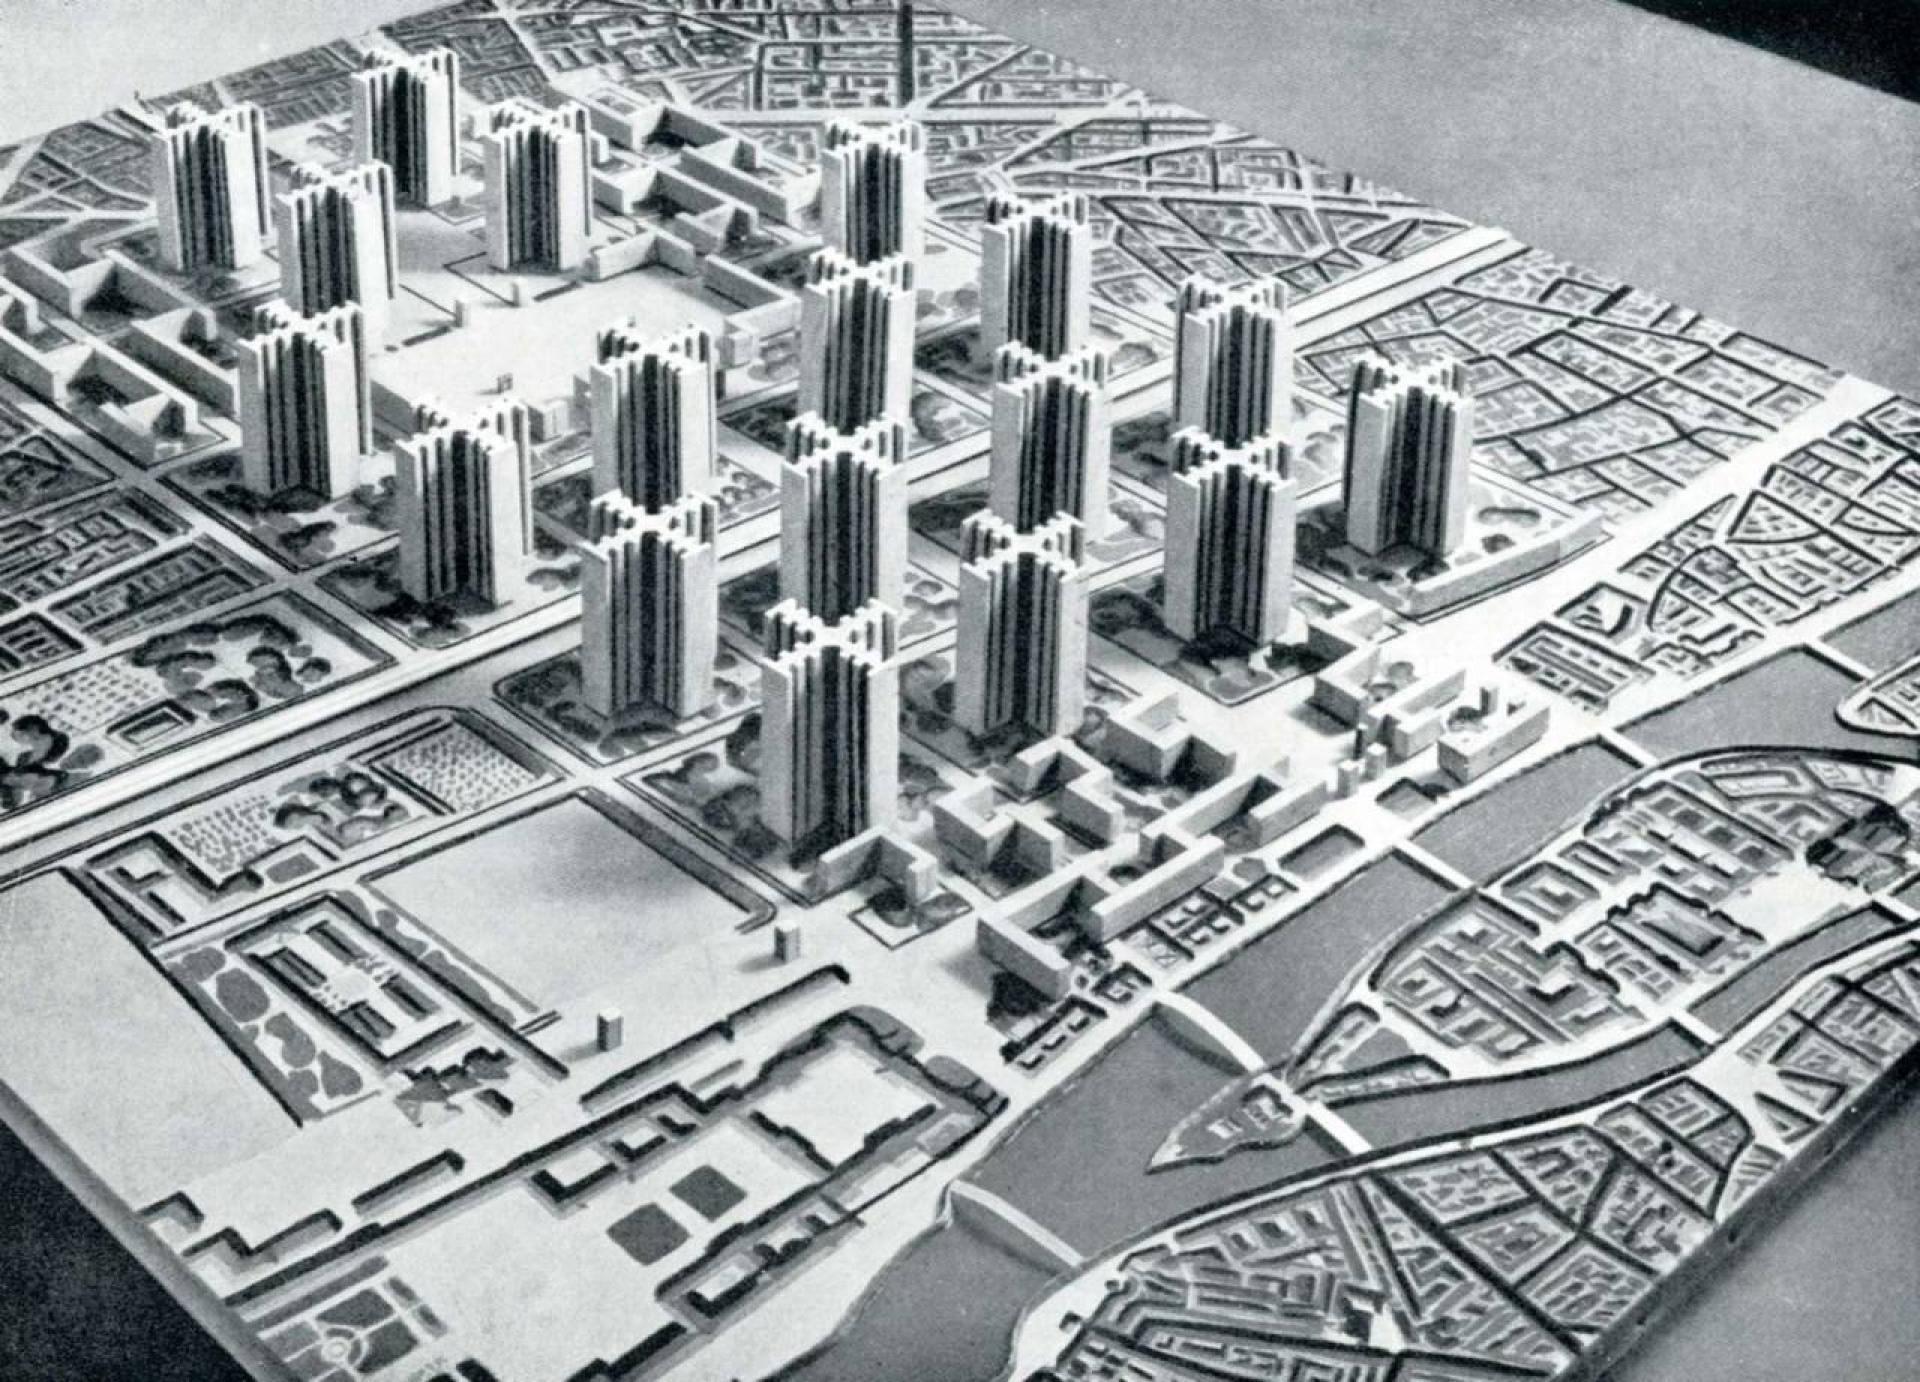 The Plan Voisin (1925) foresaw the destruction and reconstruction of Paris.